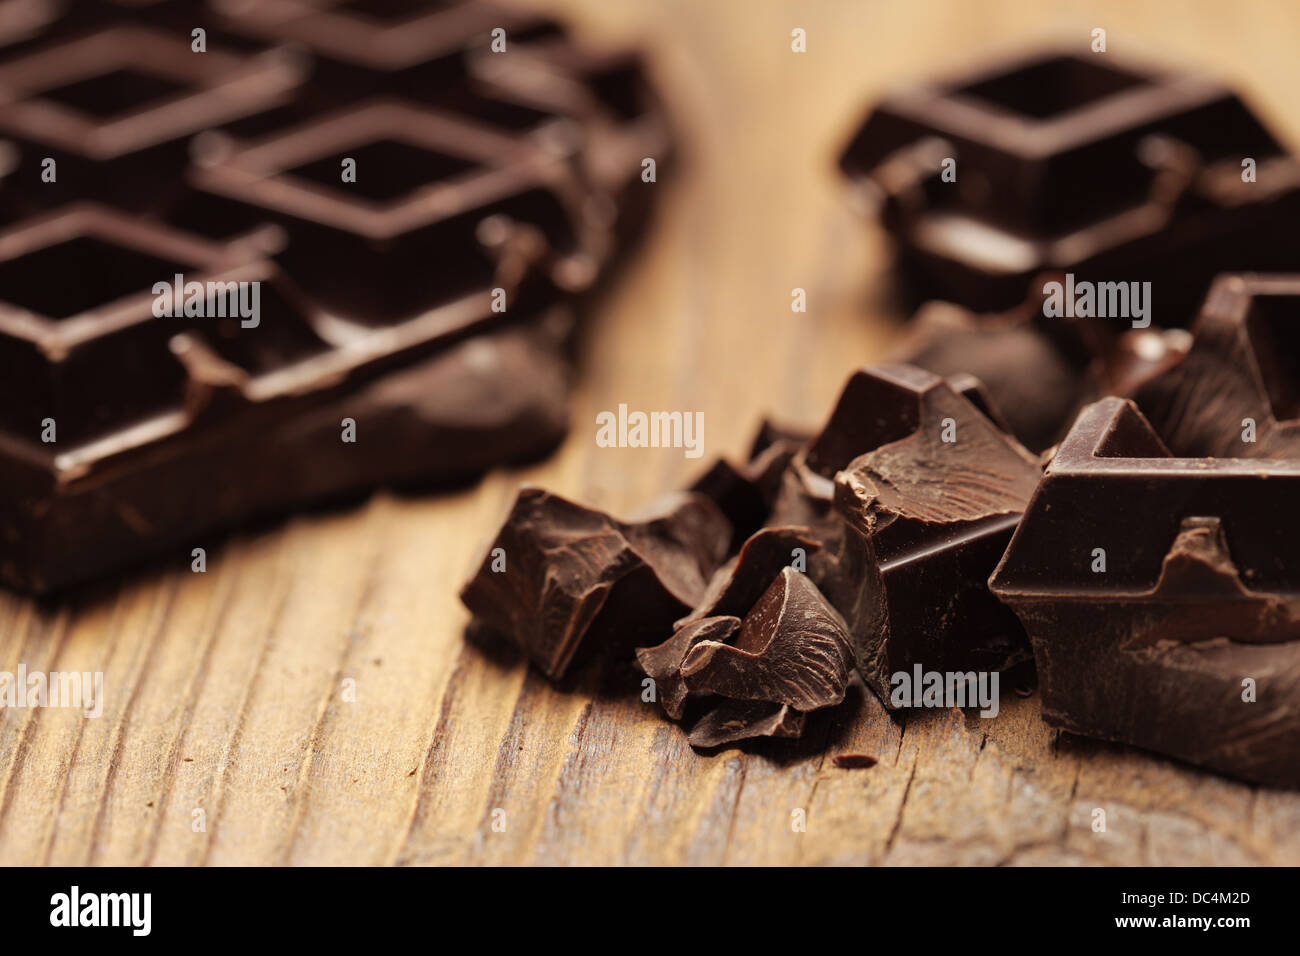 Pieces of dark chocolate  on a wooden background Stock Photo